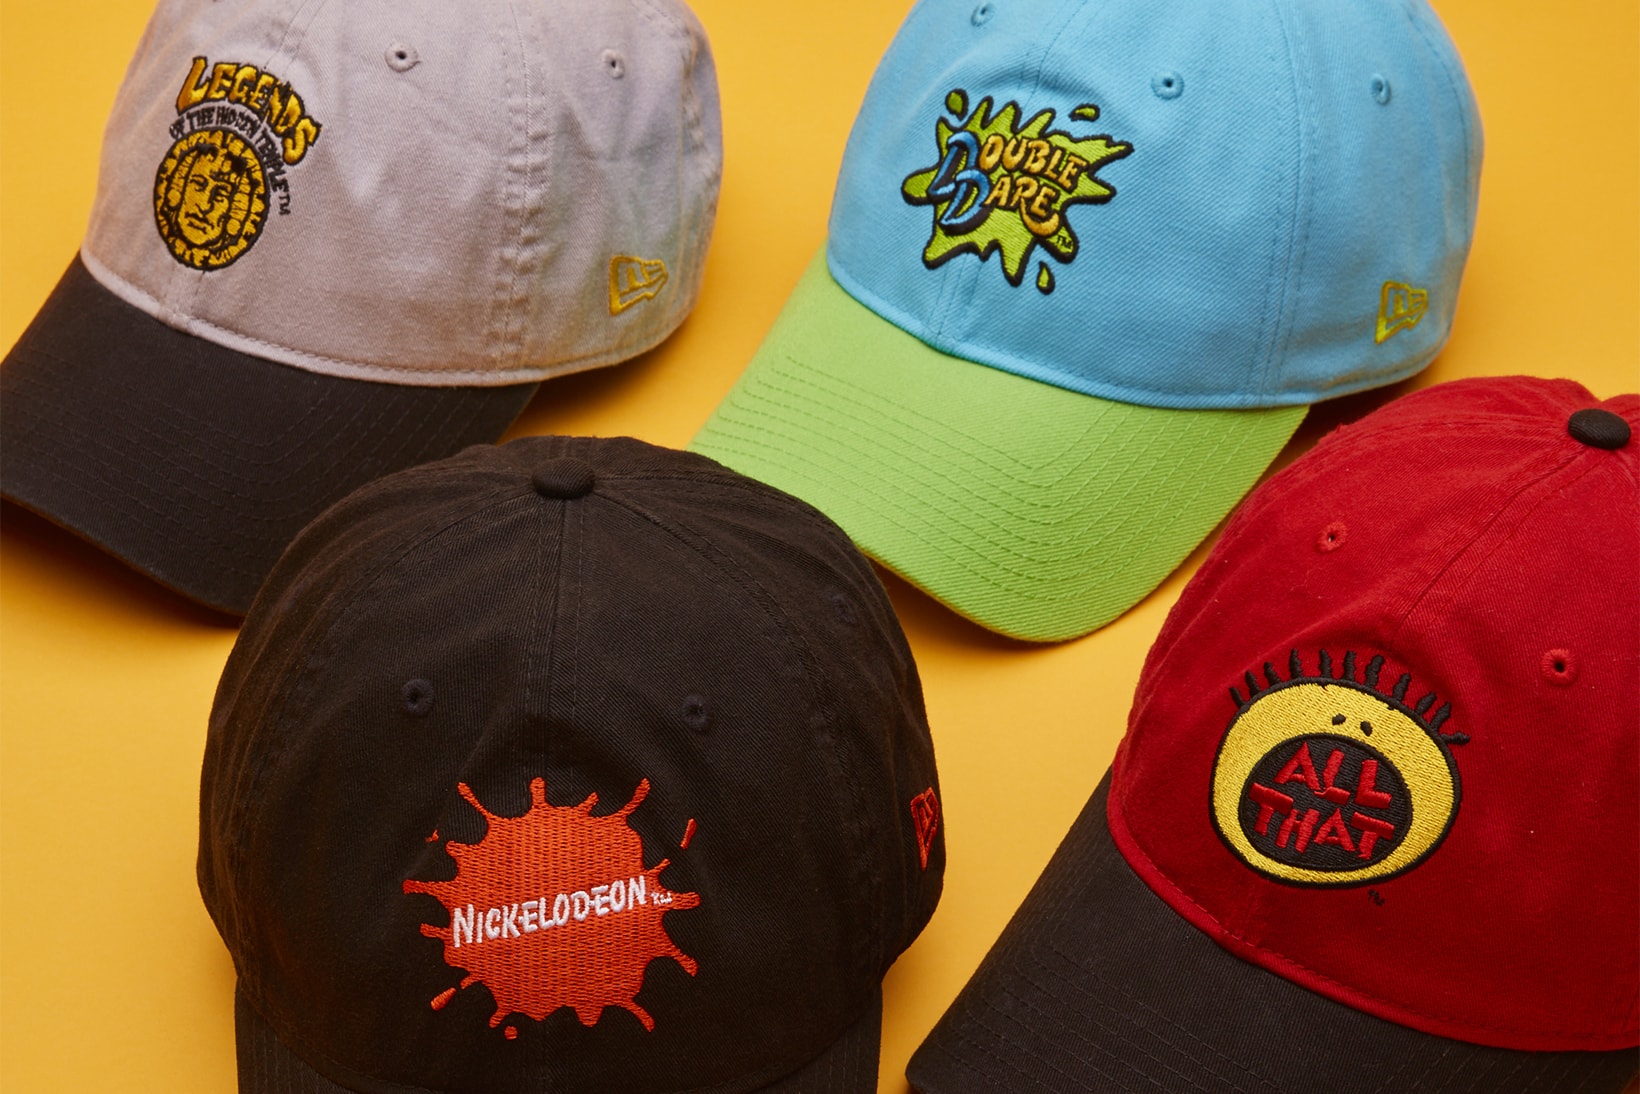 Nickelodeon New Era Hats Collaboration Hey Arnold Rugrats All That Helga Angry Beavers all day ahh real monsters legends of the hidden temple